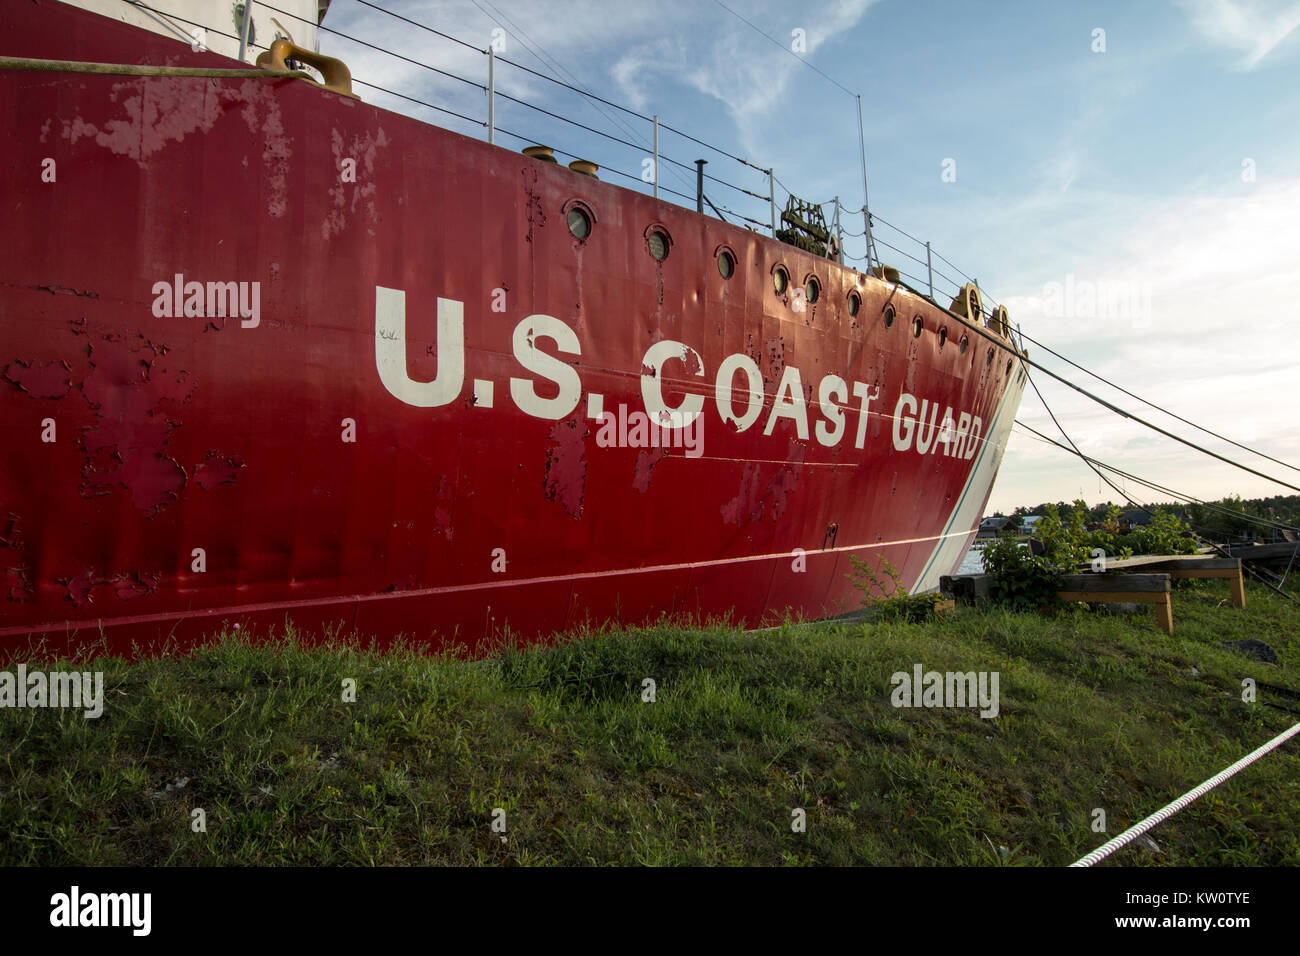 United States Coast Guard Ship. The US Coast Guard icebreaker Mackinaw is retired ship that now operates as a museum in Mackinaw City, Michigan. Stock Photo